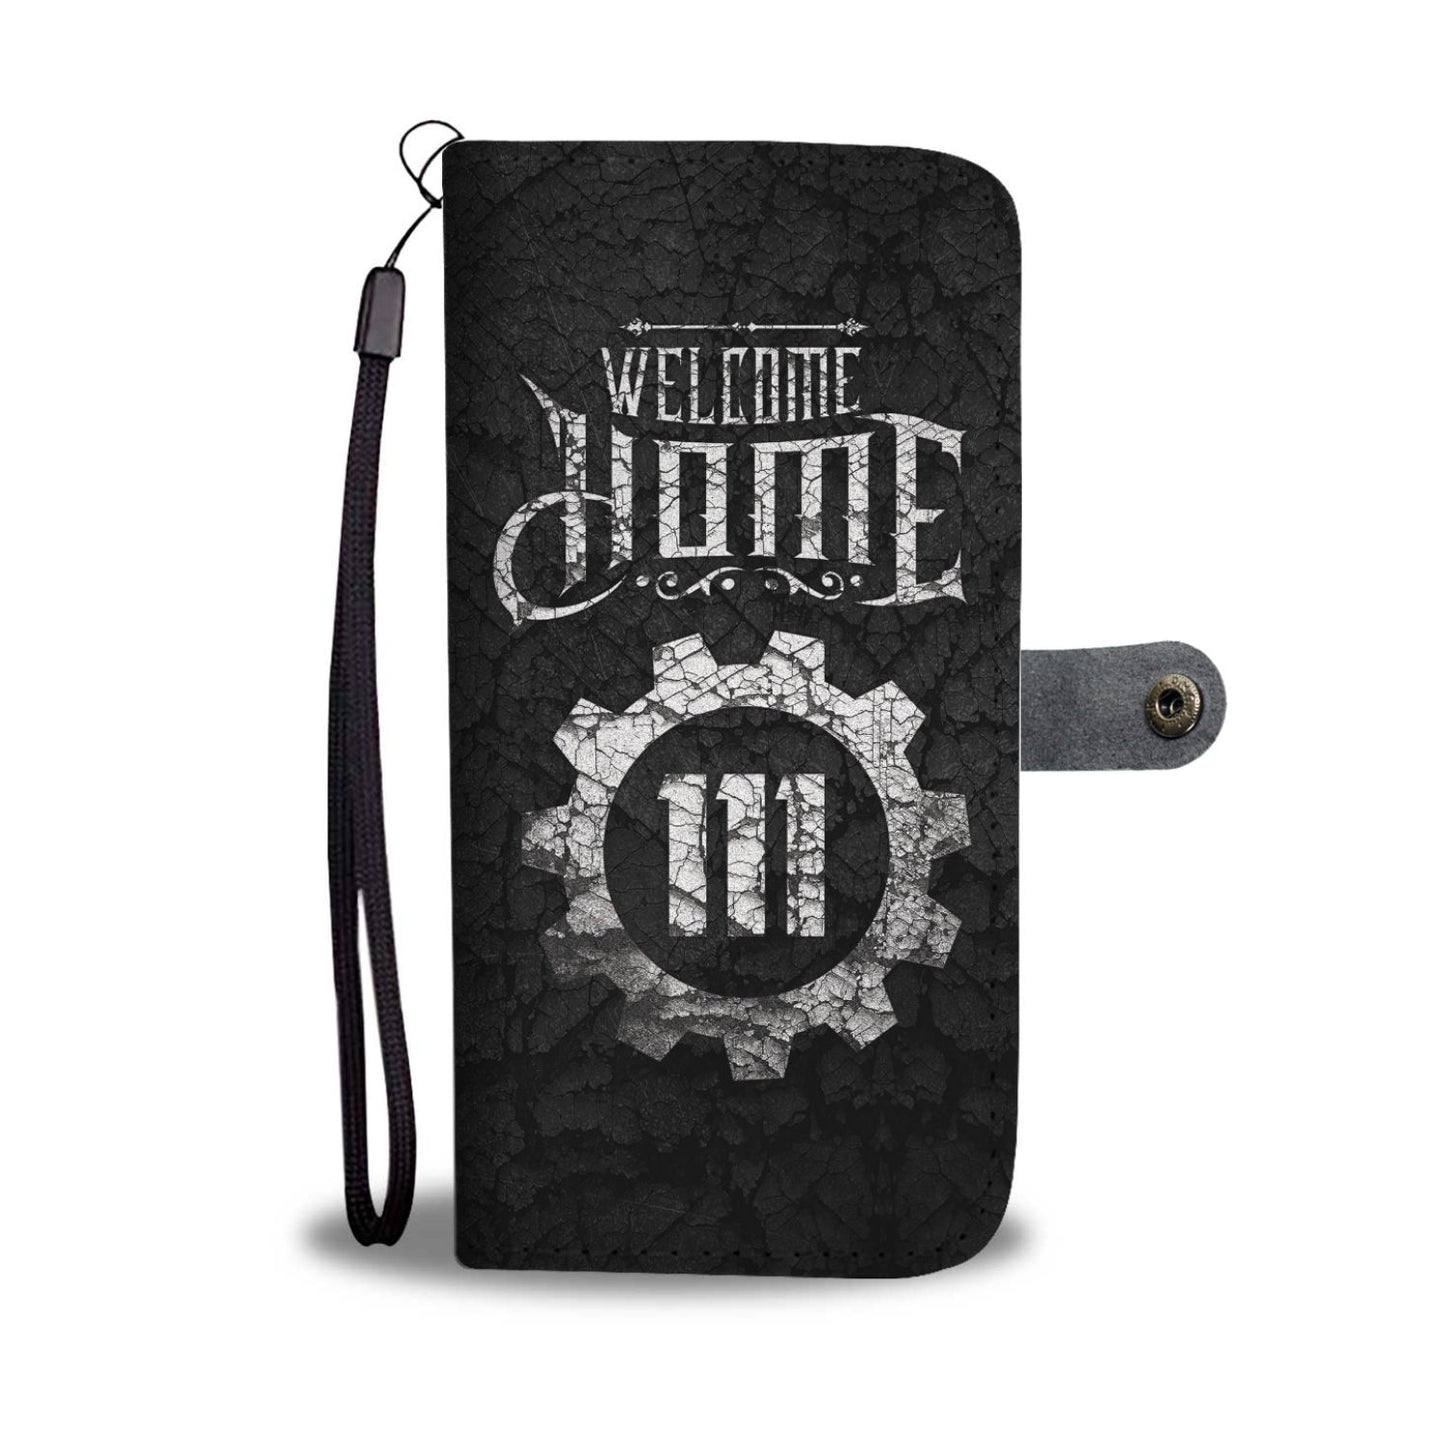 Welcome Home 111 Phone Wallet Case